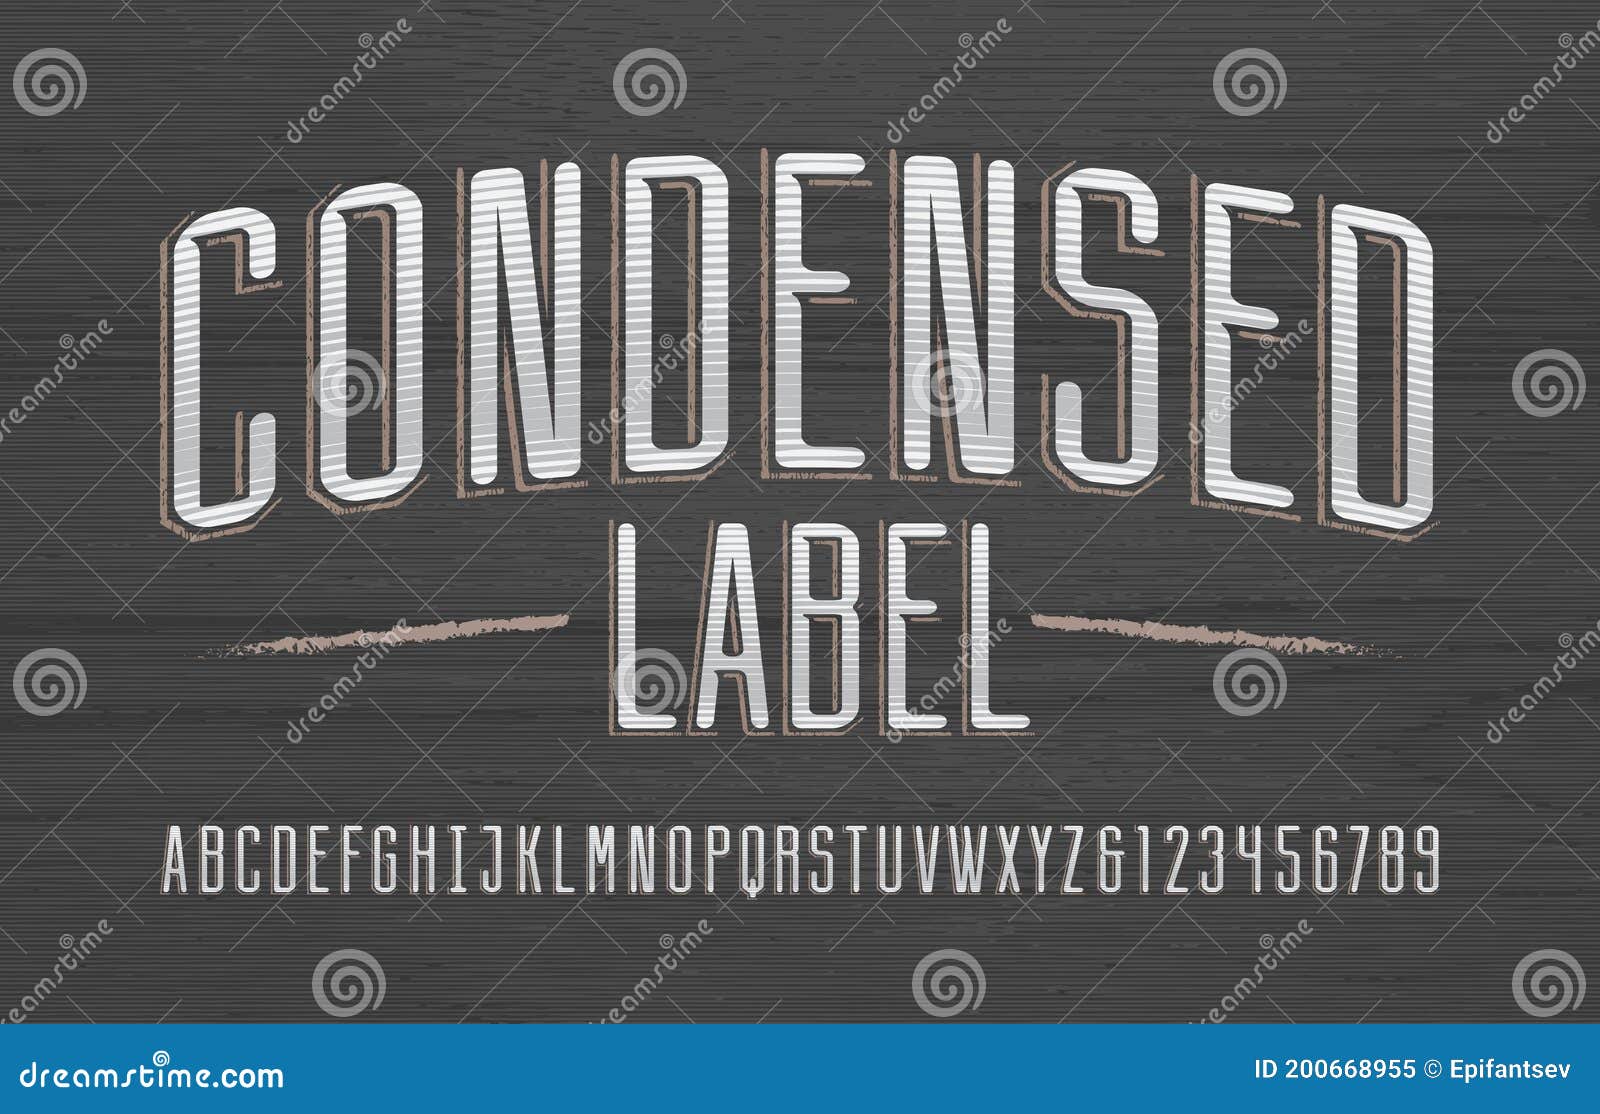 condensed label alphabet font. vintage scratched letters and numbers.